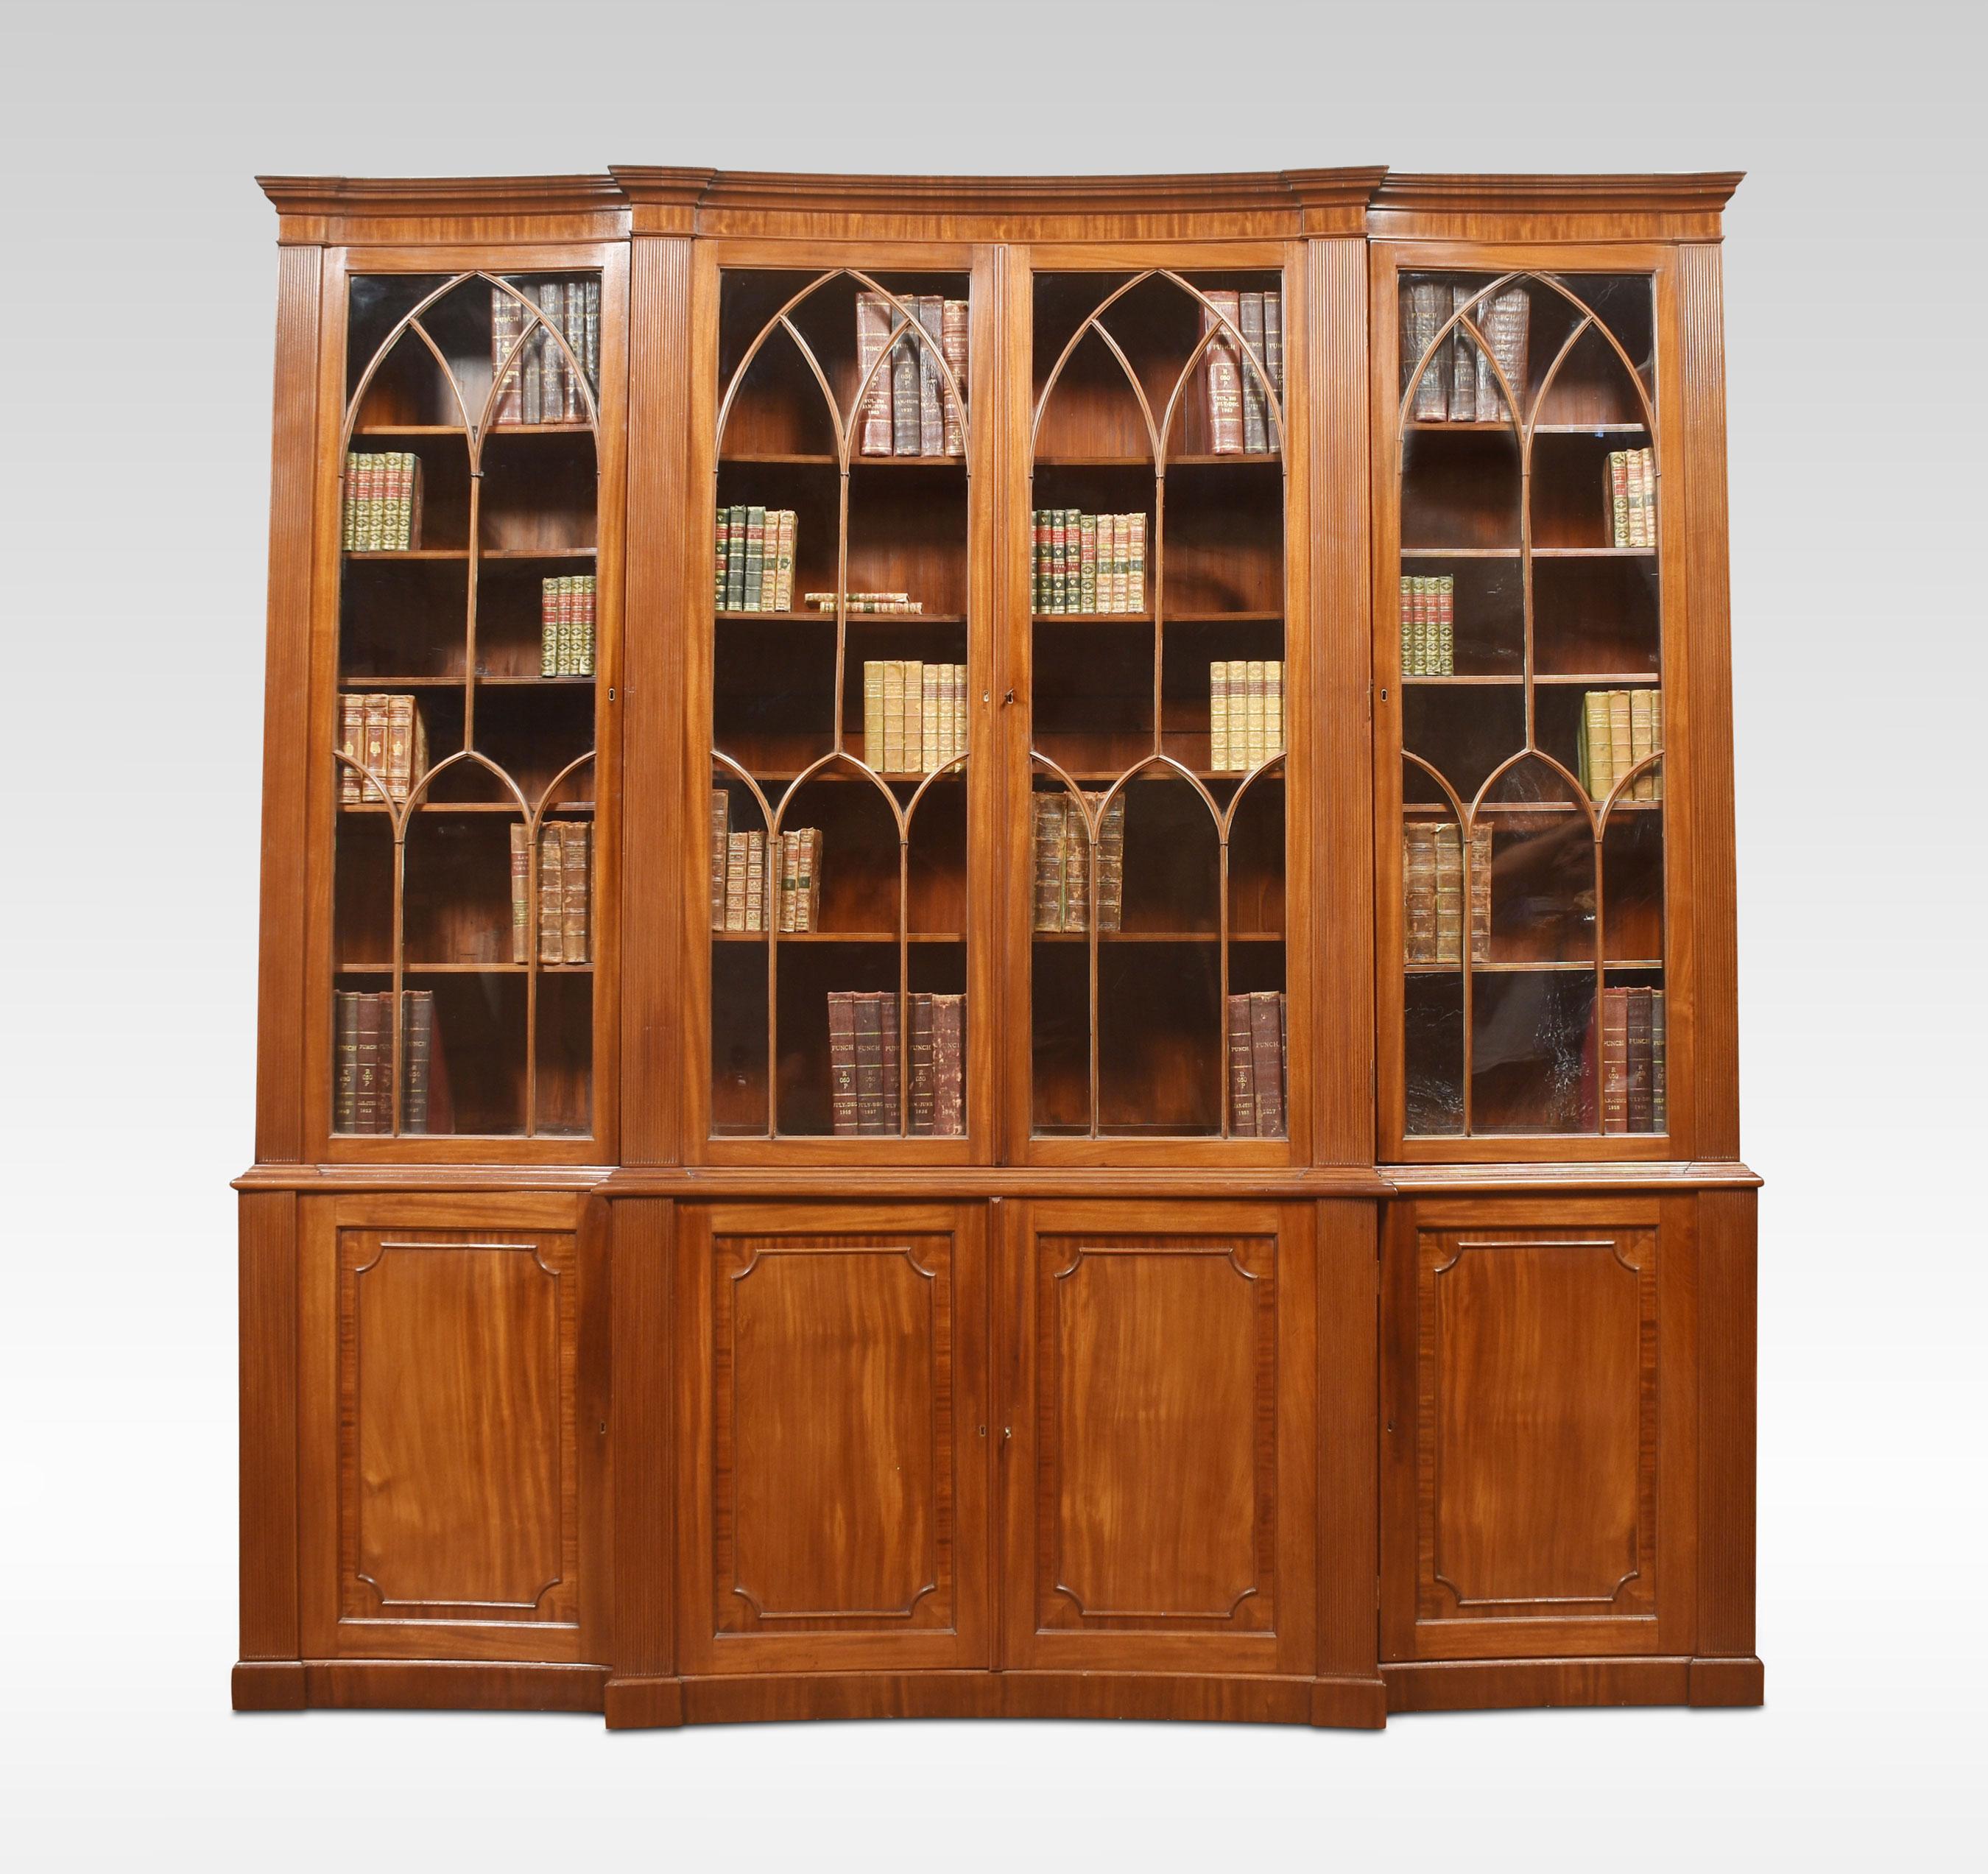 Mahogany breakfront library bookcase, the concaved moulded cornice, above four large curved astragal glazed doors opening to reveal adjustable shelved interior flanked by reeded columns. The base section is fitted with central panelled doors opening